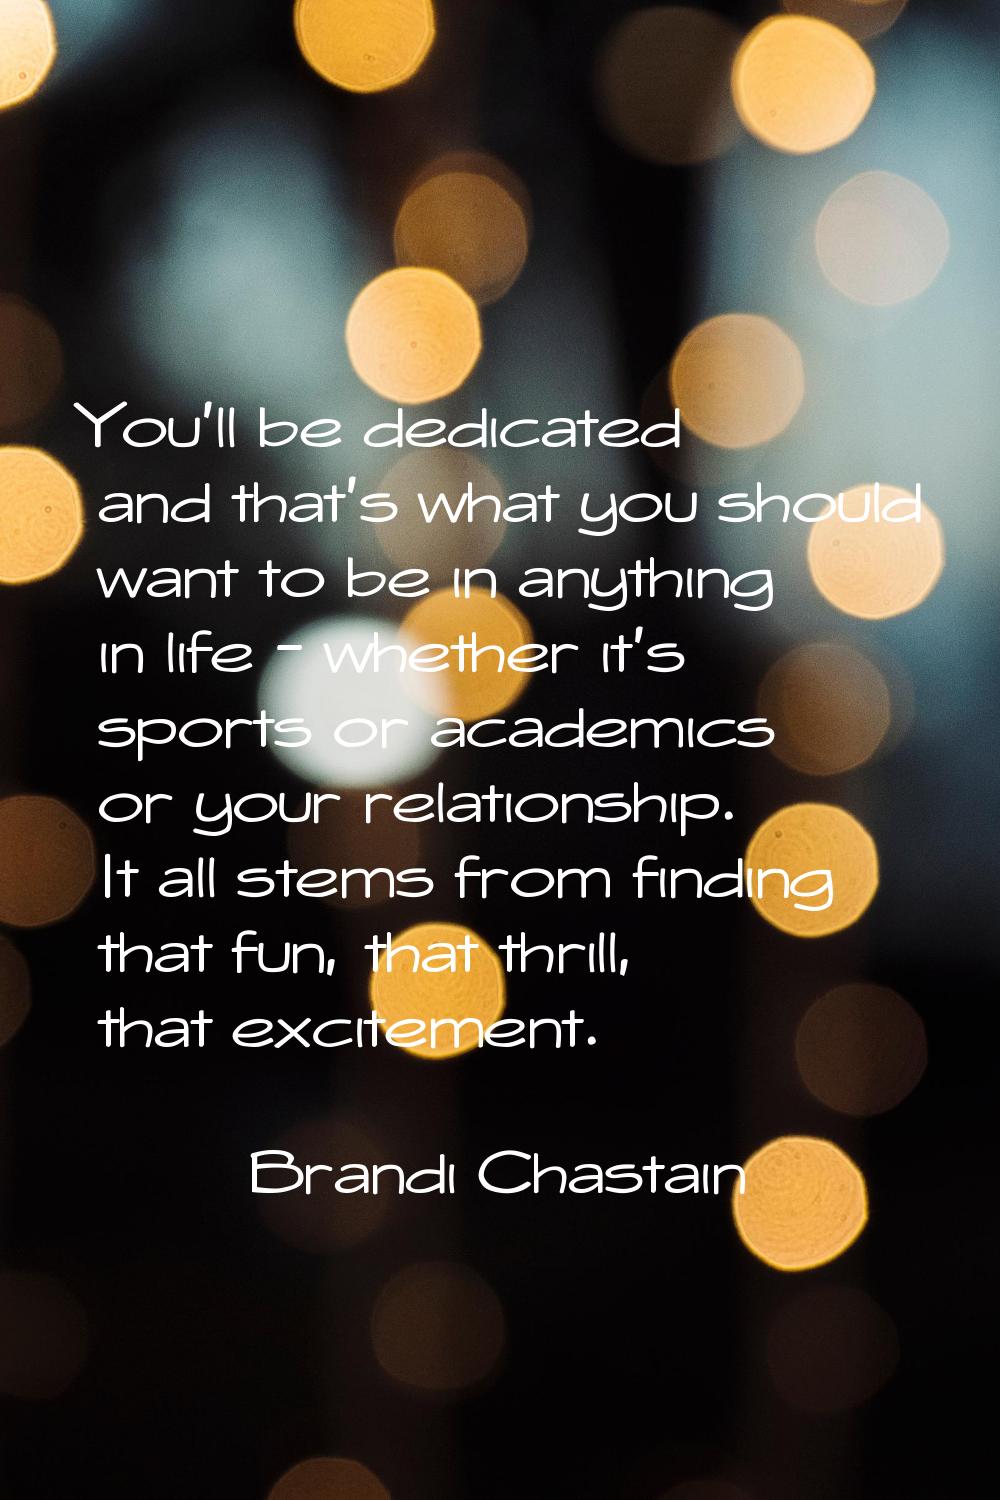 You'll be dedicated and that's what you should want to be in anything in life - whether it's sports